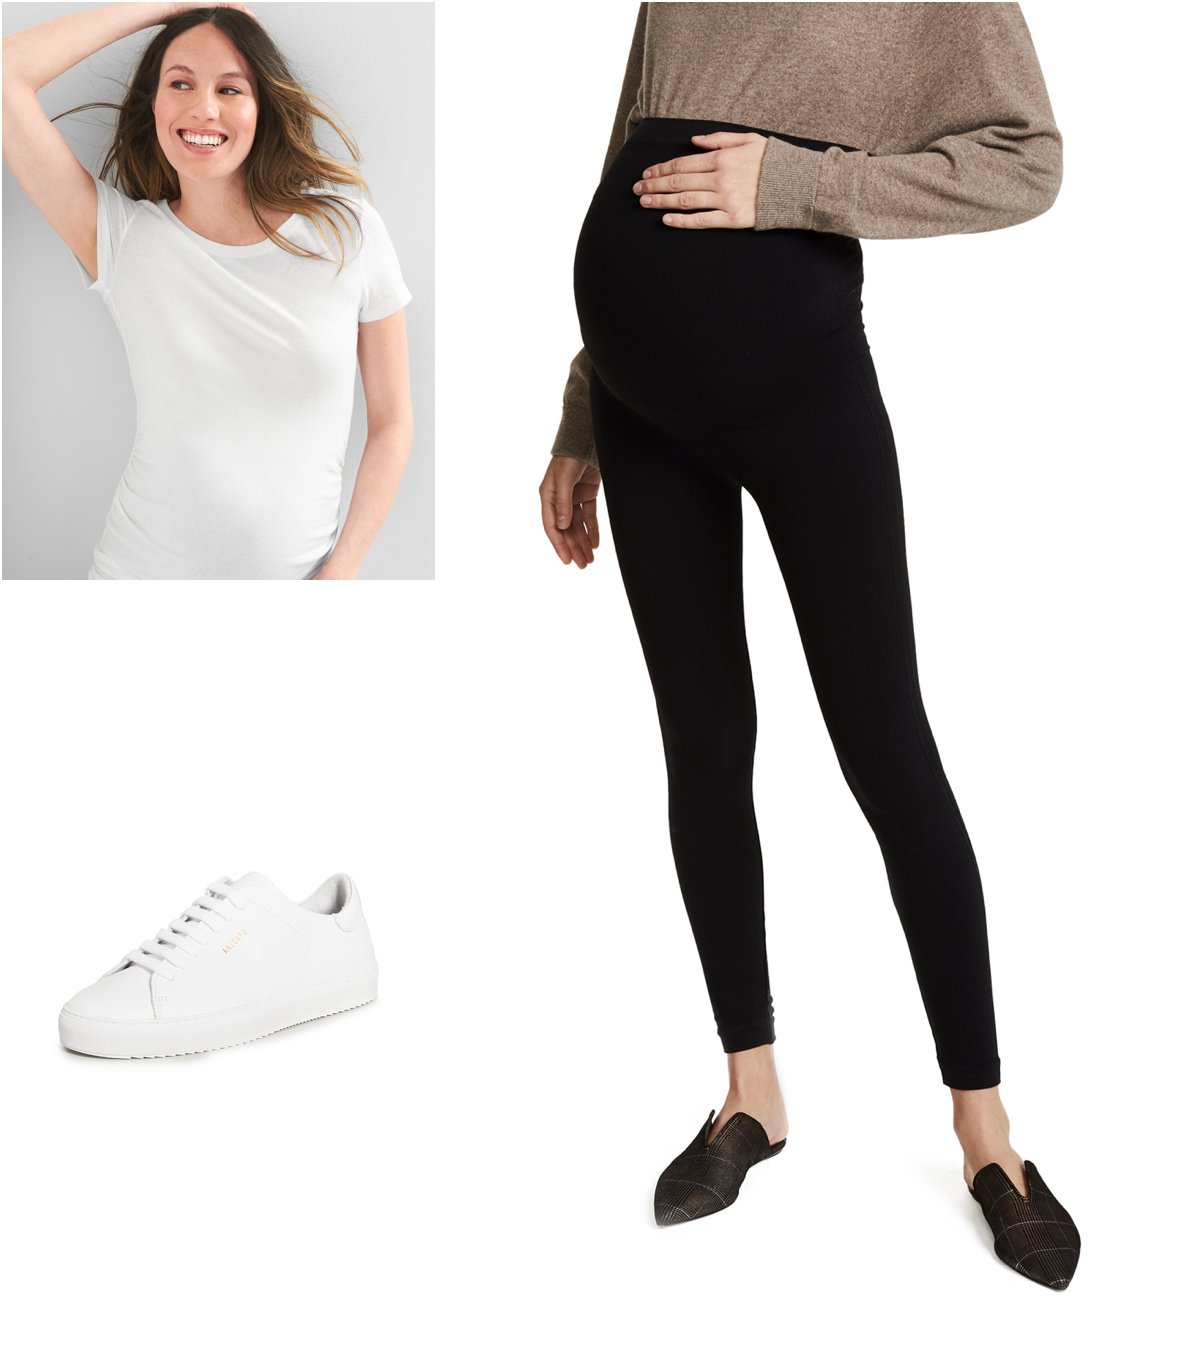 4 Different Looks Using The Same Maternity Tee, Leggings & Sneakers -  Meagan's Moda